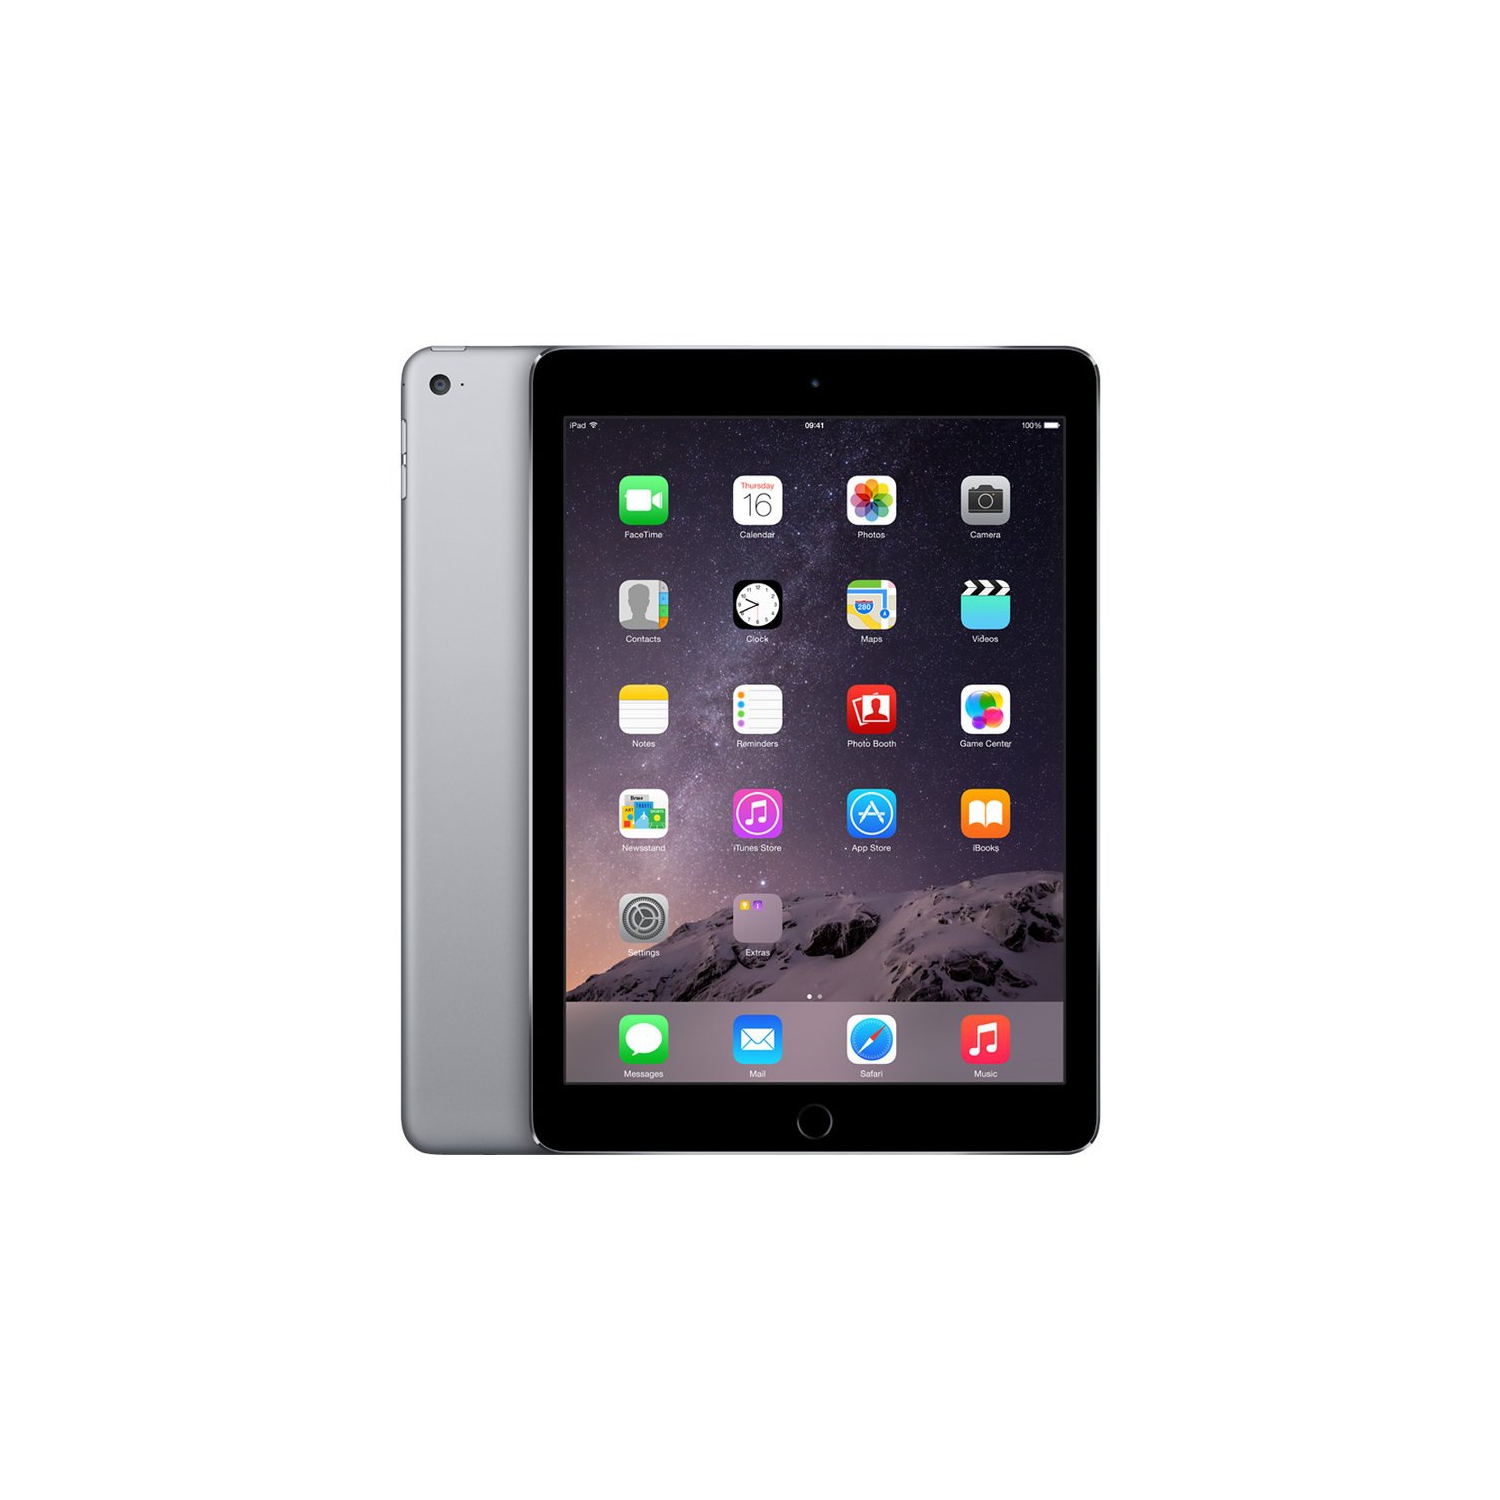 Refurbished (Excellent) - Apple iPad Air 2 9.7" screen 32GB - WiFi (2014 - A1566) Space Gray - Certified Refurbished